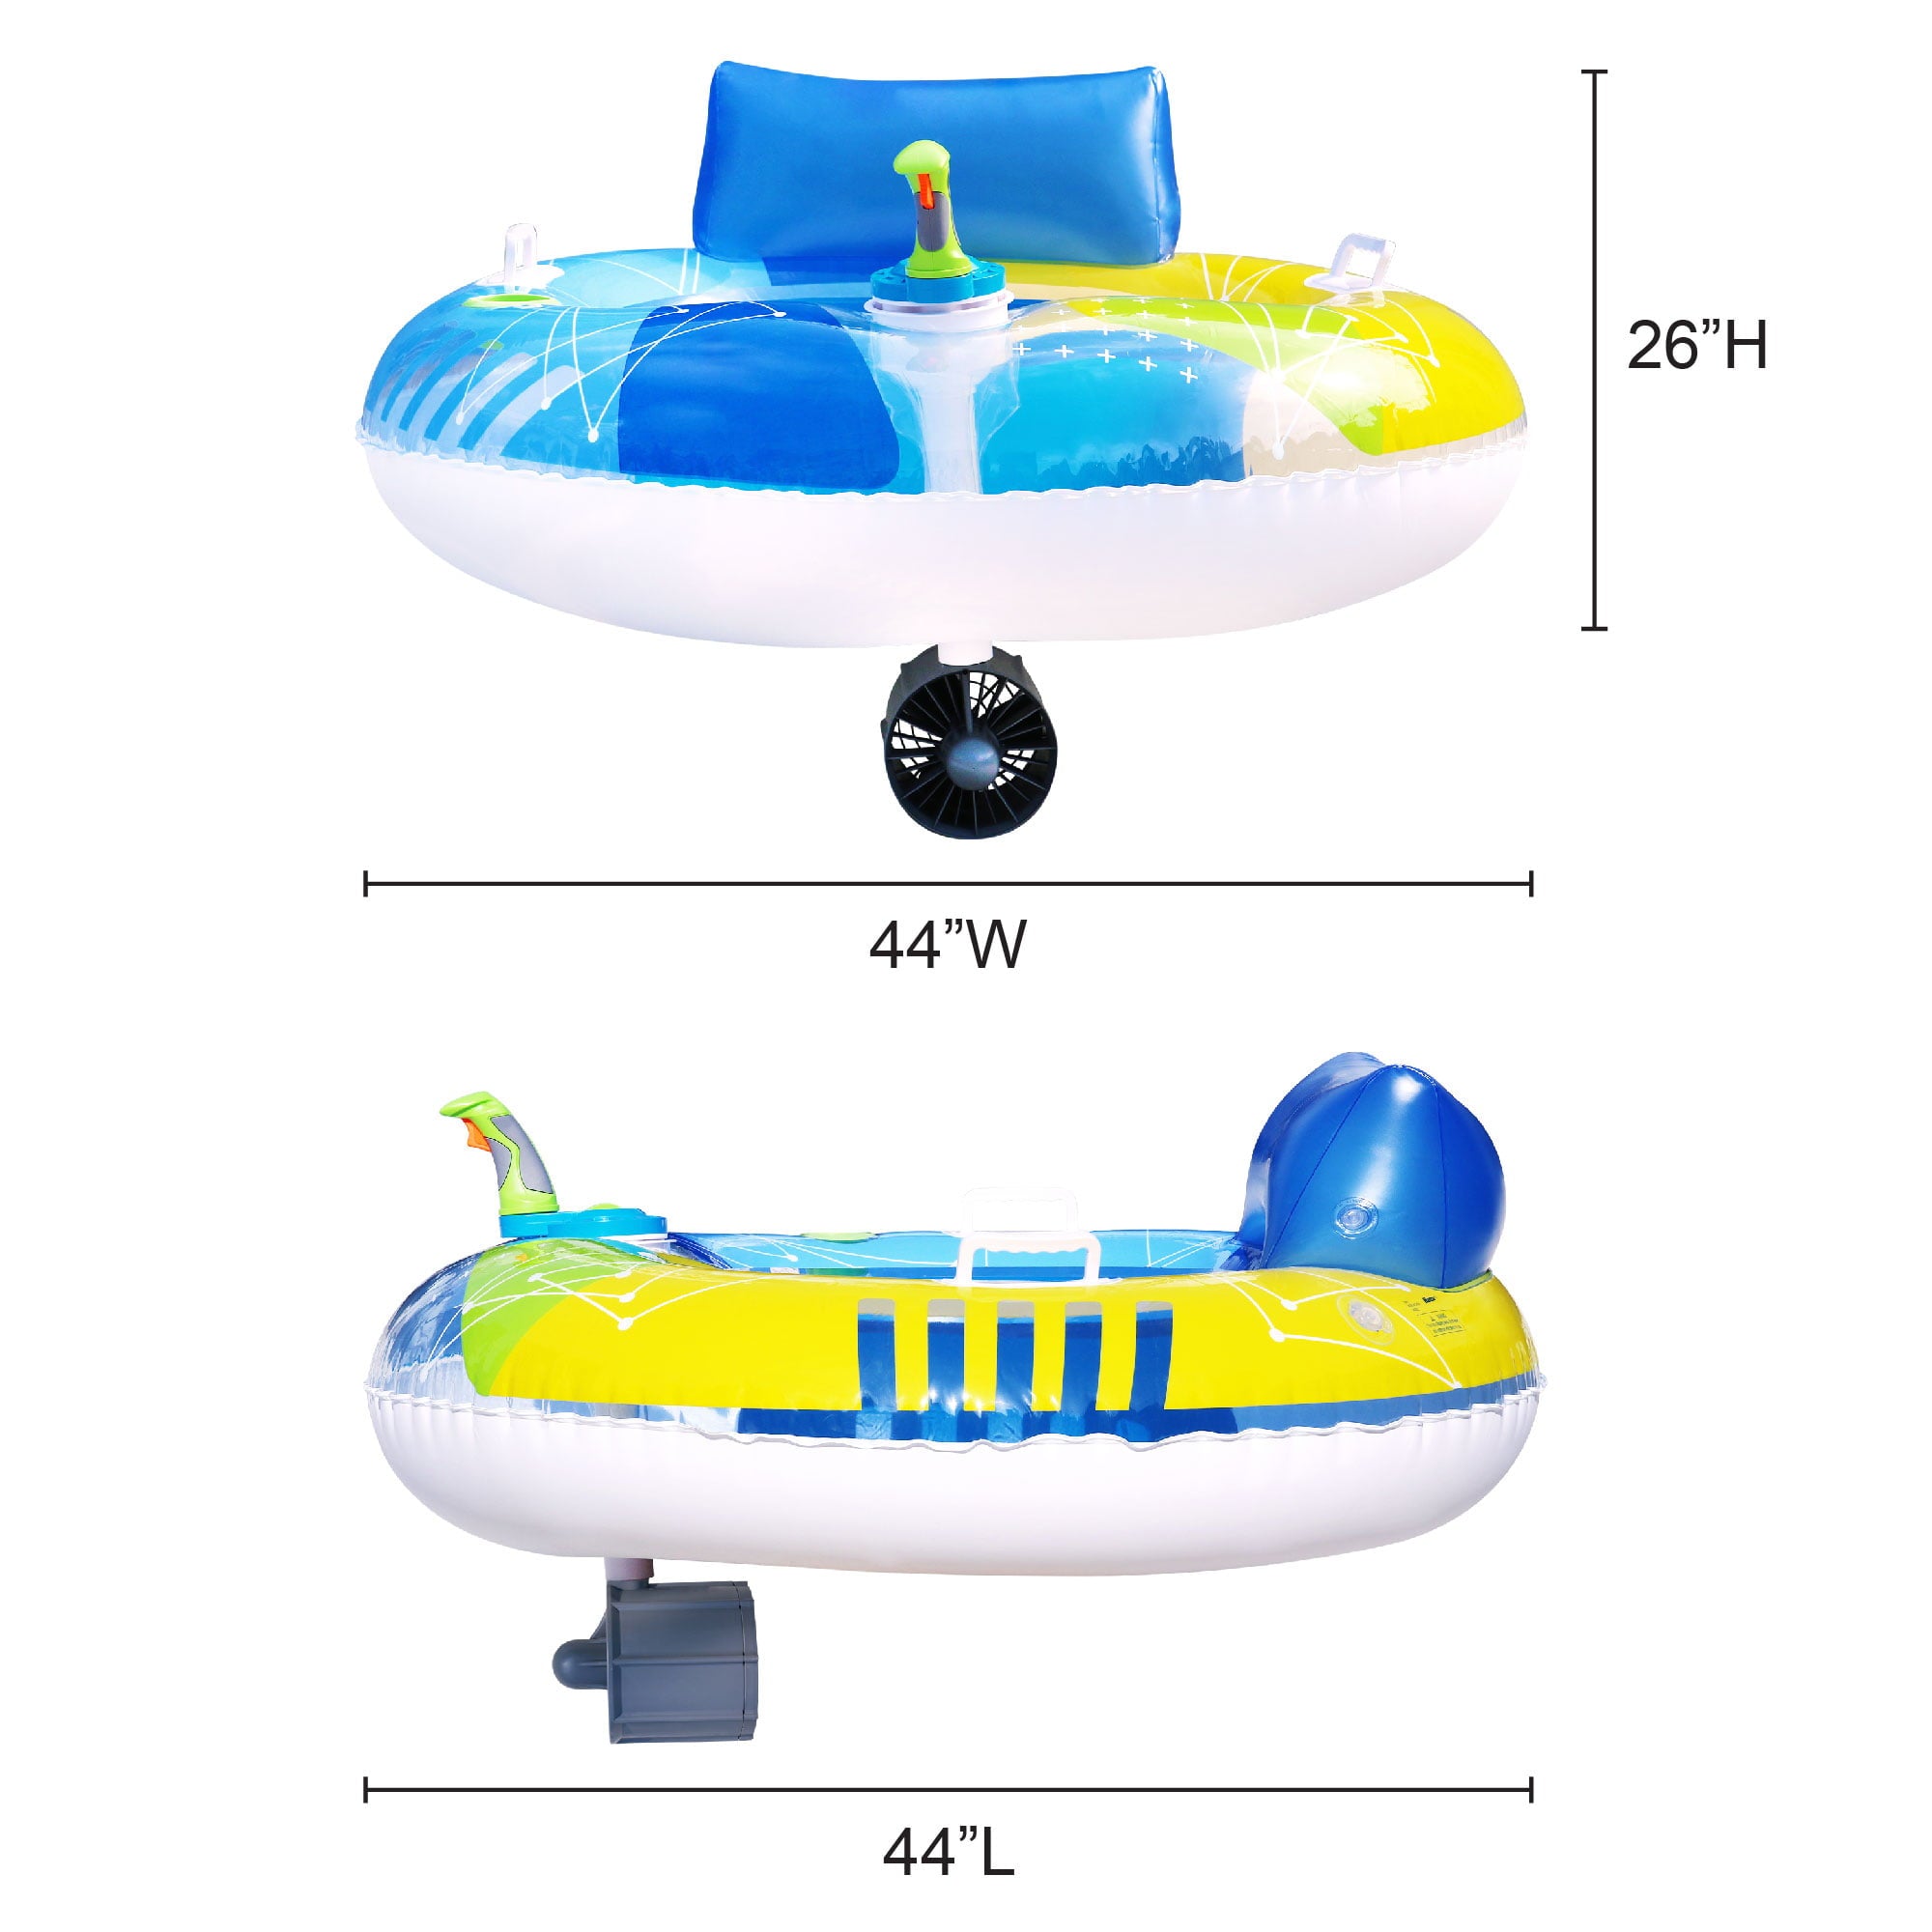 Banzai Motorized Pool Cruiser Multicolor Teens Adults Battery Powered PVC Summer Float, Ages 14+, Unisex